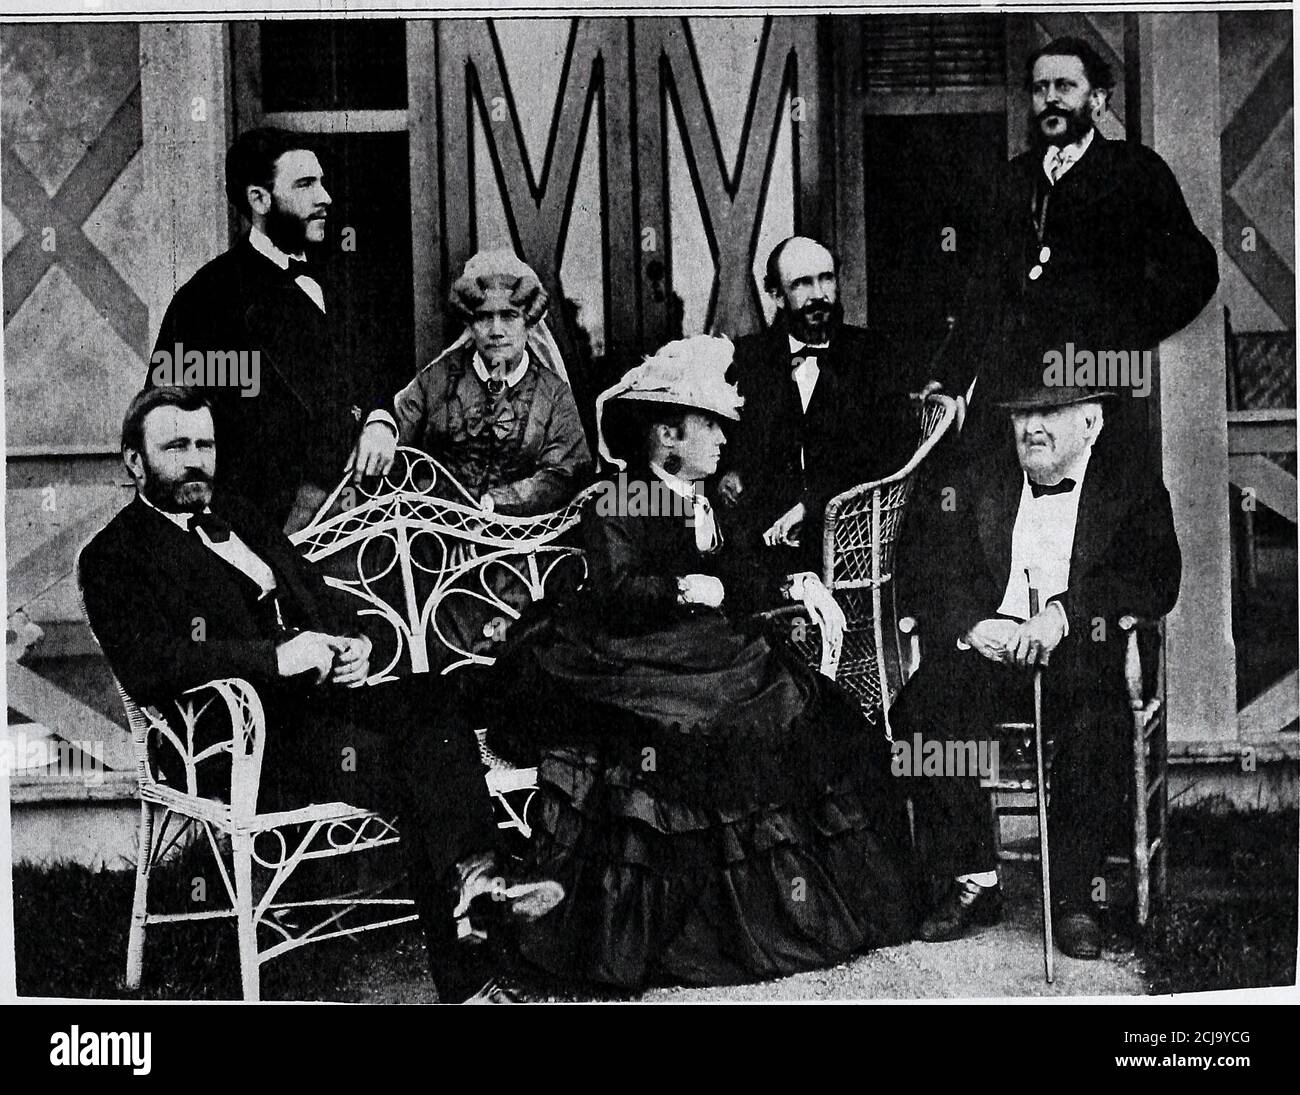 . Civil War officers. Union . THE GREAT-GRANDDAUGHTER OF GENERAL GRANT: PRINCESS IRINA CANTACUZENE at a Childrens Party Which Opened the Playroom of the Palmer House in Chicago. (Times Wide World Photos, Chicago Bureau.) NEIGHBOof New Yoi ! (j :■■;■:, seven uecaaes of American Celebritiesin a Photographic Exhibit. General Ulysses S. Grant, Mrs. Grant and Colonel FrederickDent, her father, occupy the front row in one of the earliest pho-tographs in Pach Brothers exhibition, American PersonalitiesThrough Seven Decades, to be held Oct. 11 to 23 in their NewYork studio. The firm, which has photogr Stock Photo